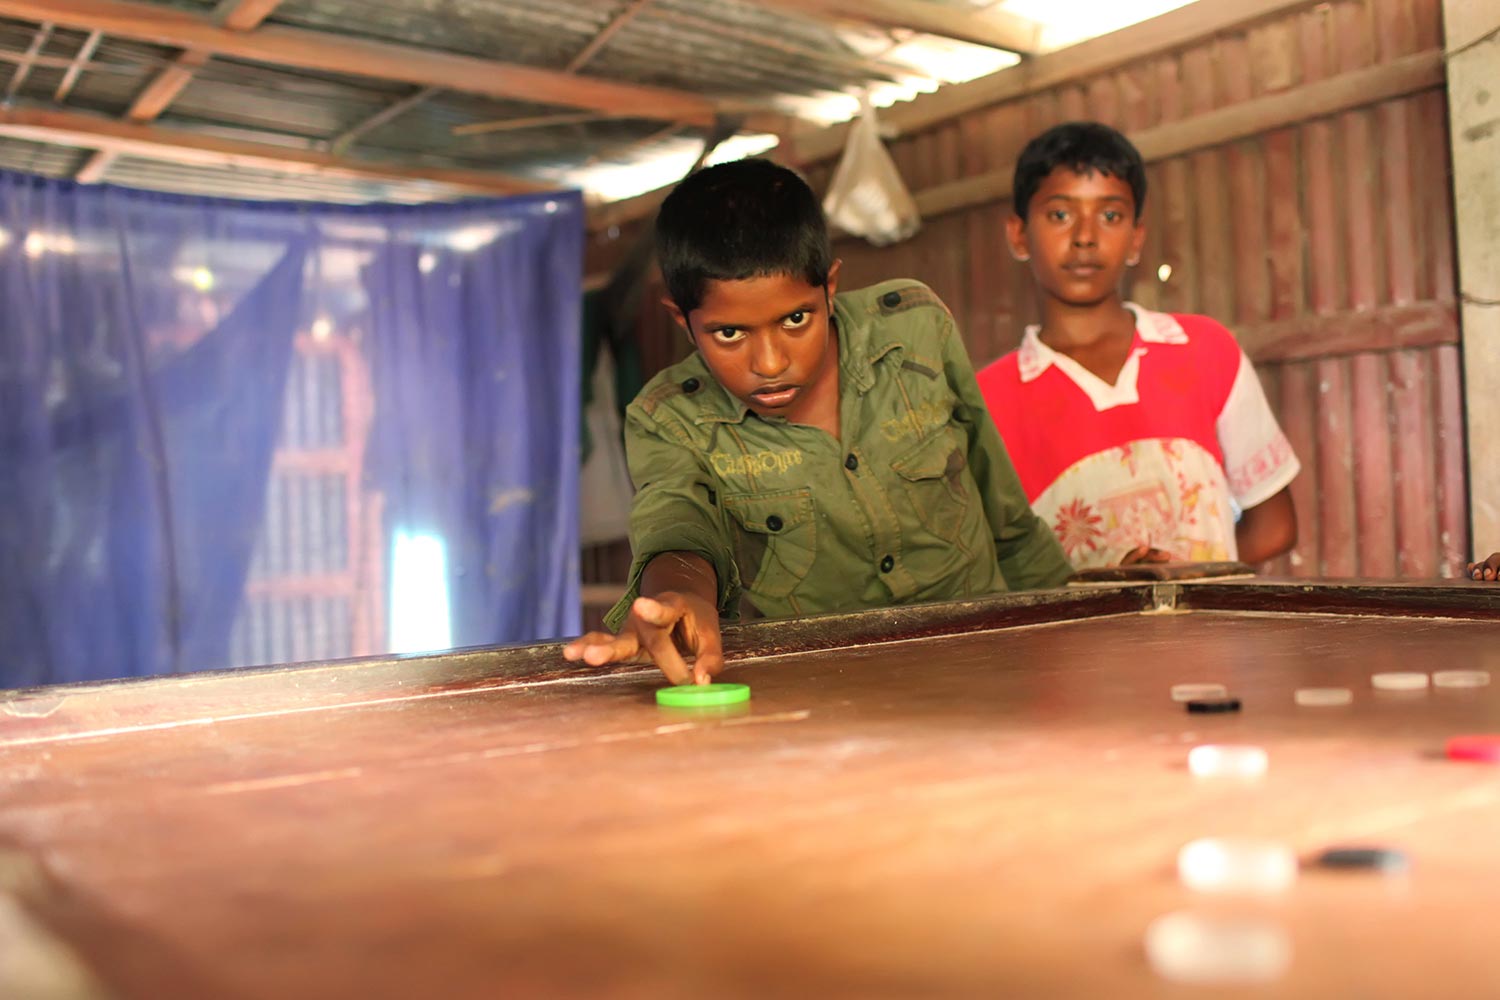 Saiful's brother plays carom at the same shop Saiful used to spend hours after school. Saiful wears the same steely gaze as his brother during the intense carom skirmishes in Singapore's Little India